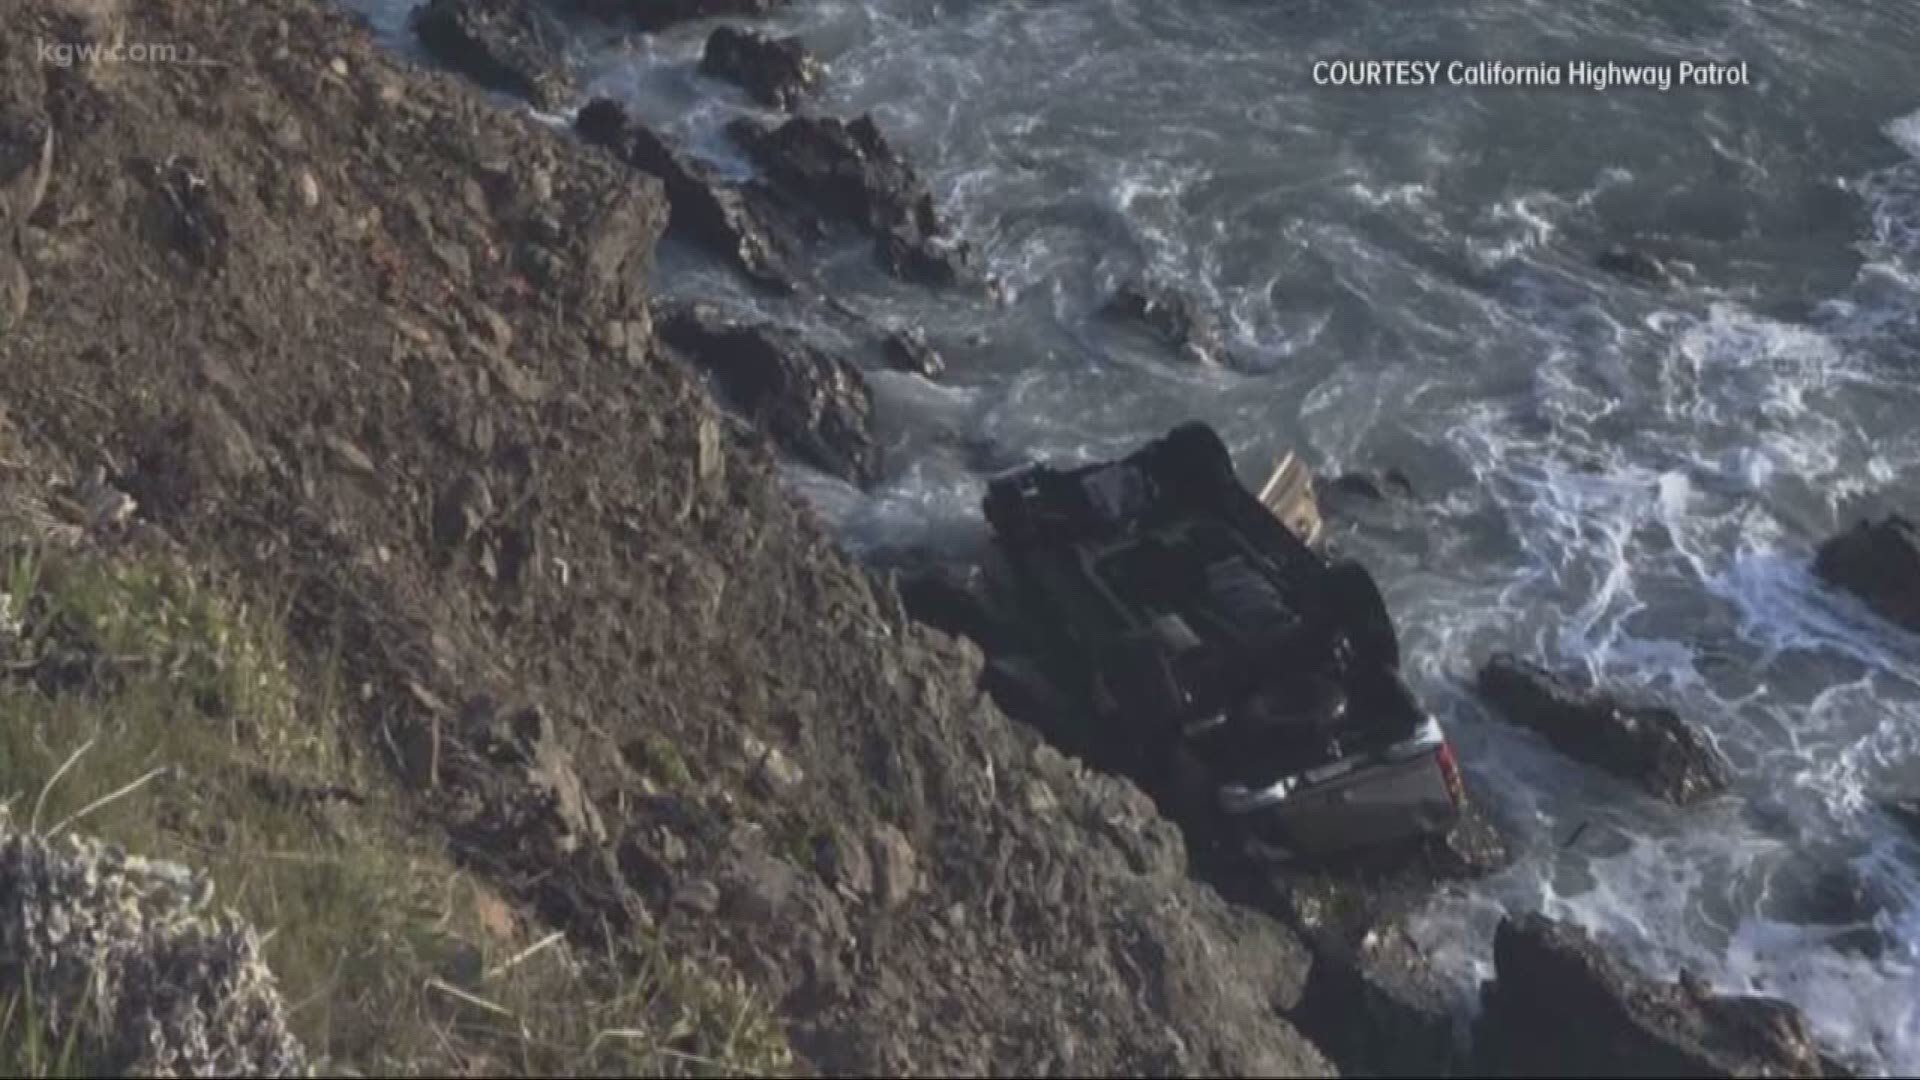 CHP: Hart family SUV accelerated off cliff